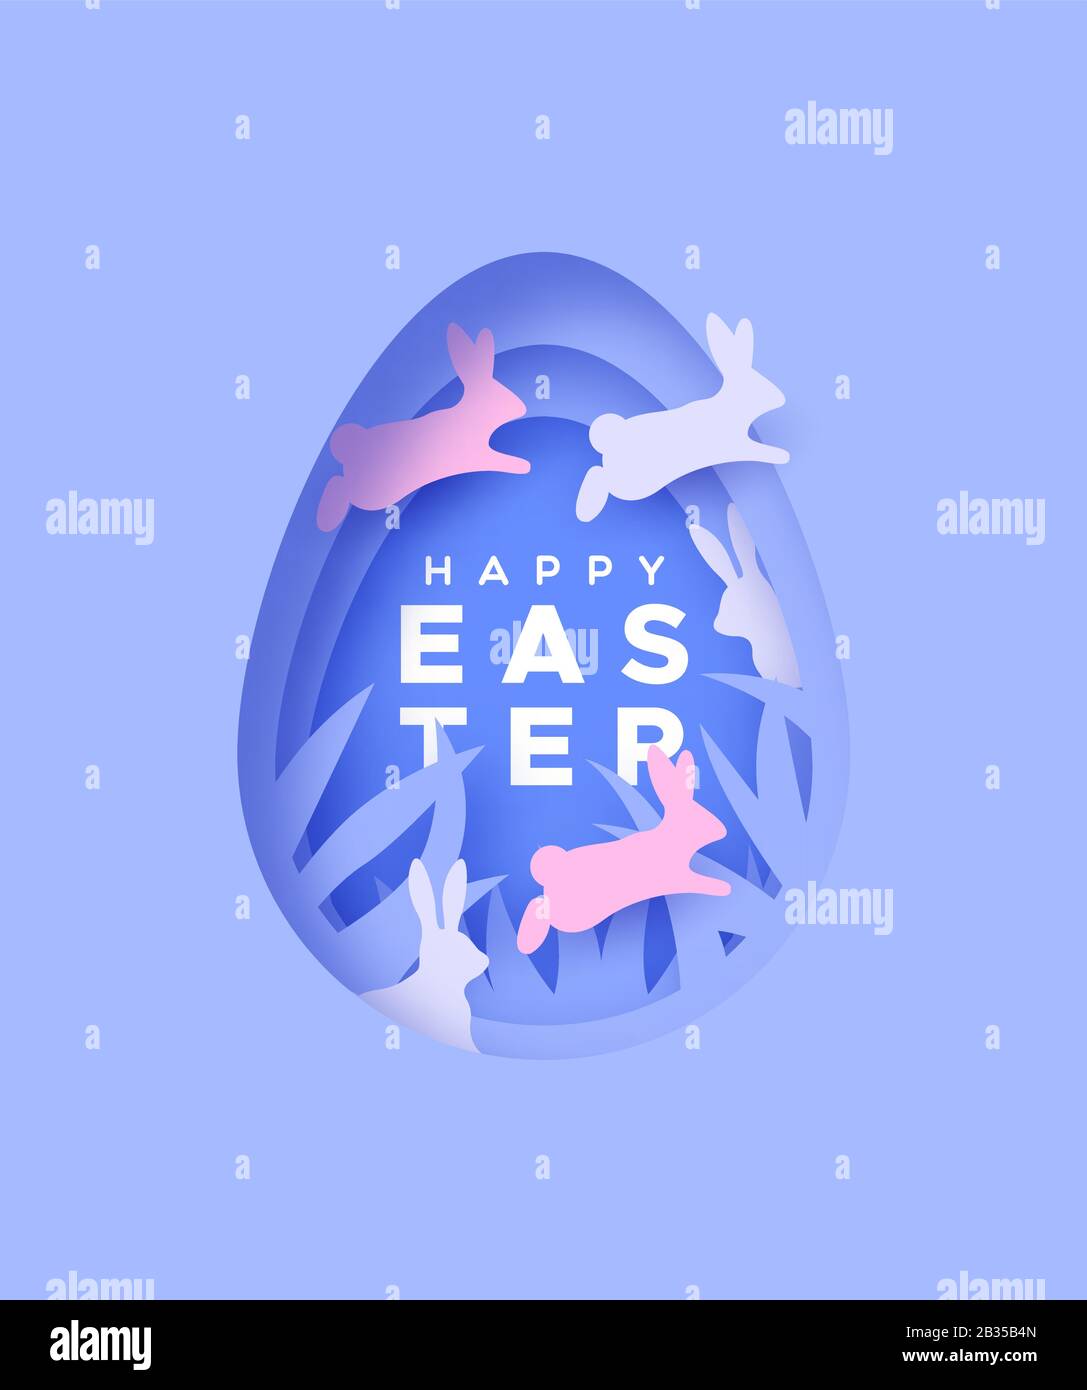 Happy Easter papercut greeting card of egg with paper cut jumping rabbit, nature decoration and festive text quote. Realistic 3d holiday cutout craft Stock Vector